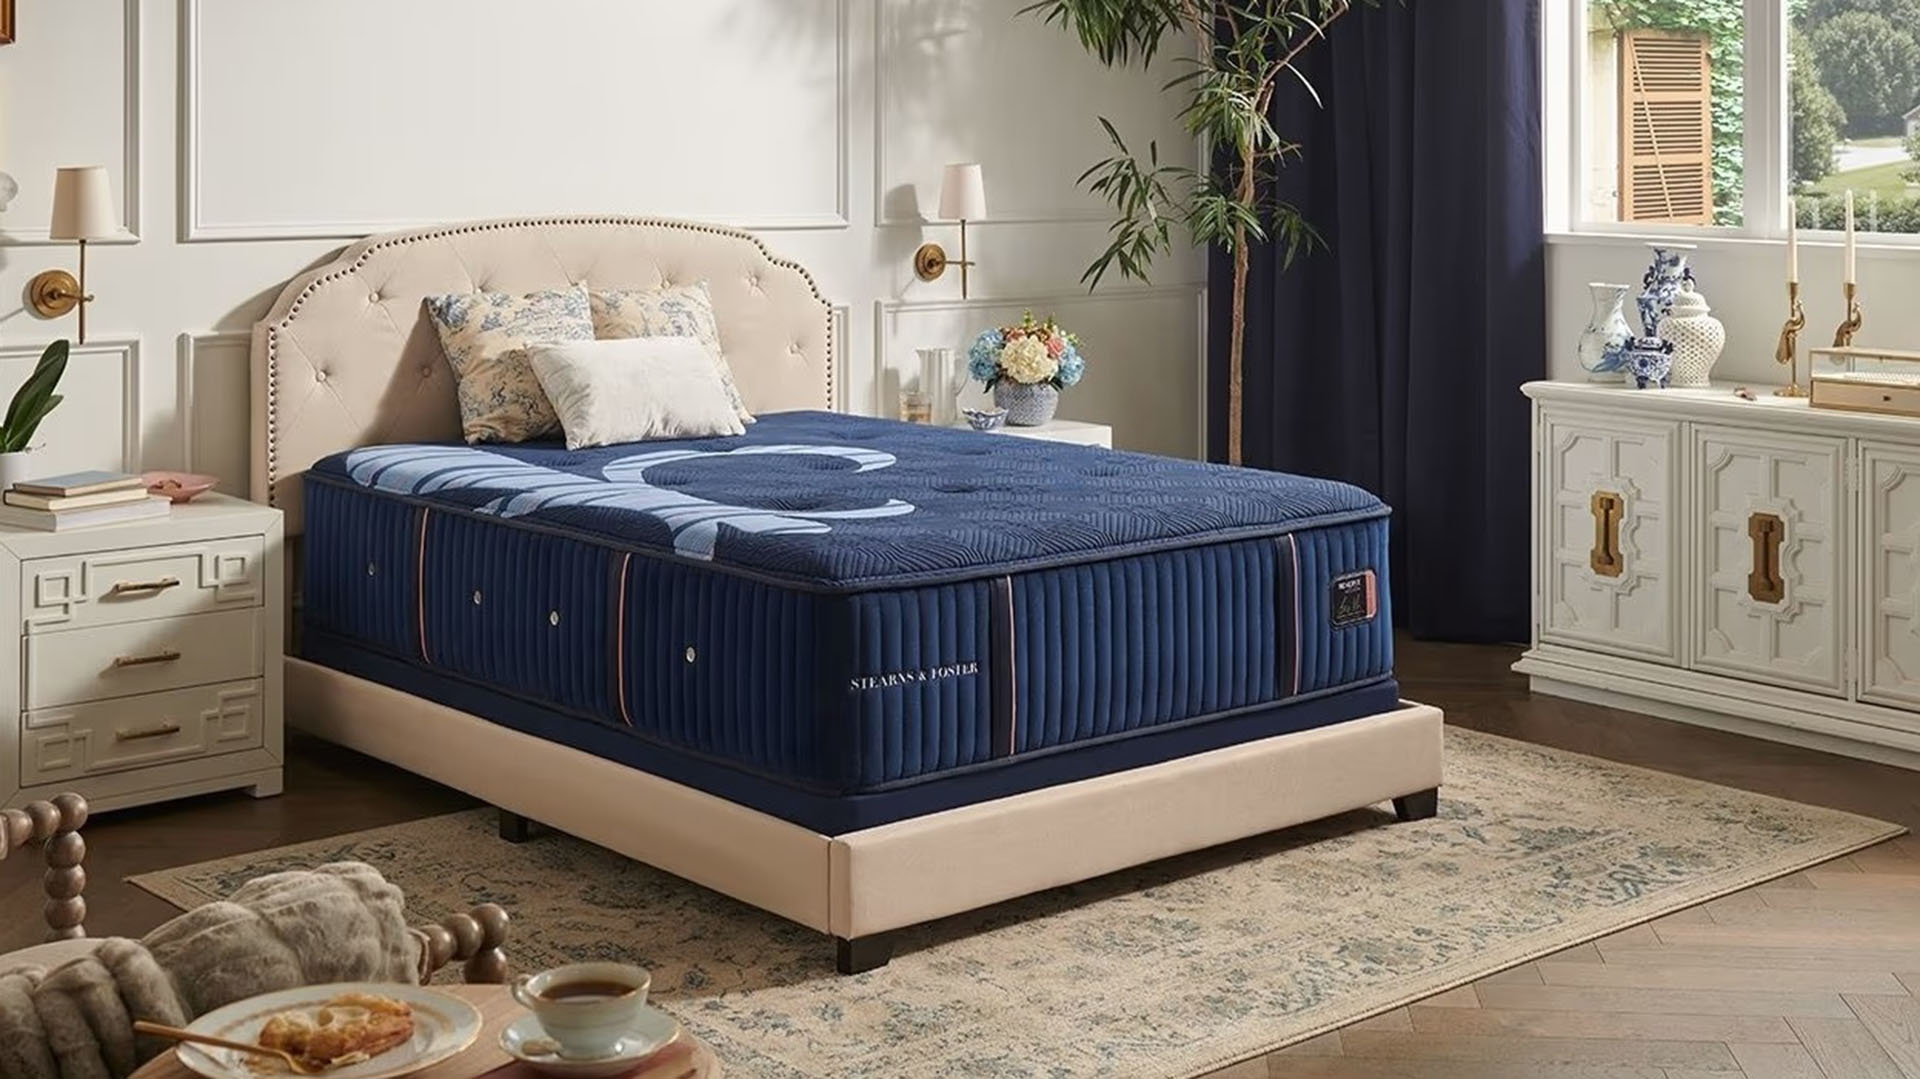 Stearns & Foster mattresses in Edmond are designed with comfort and support in mind.